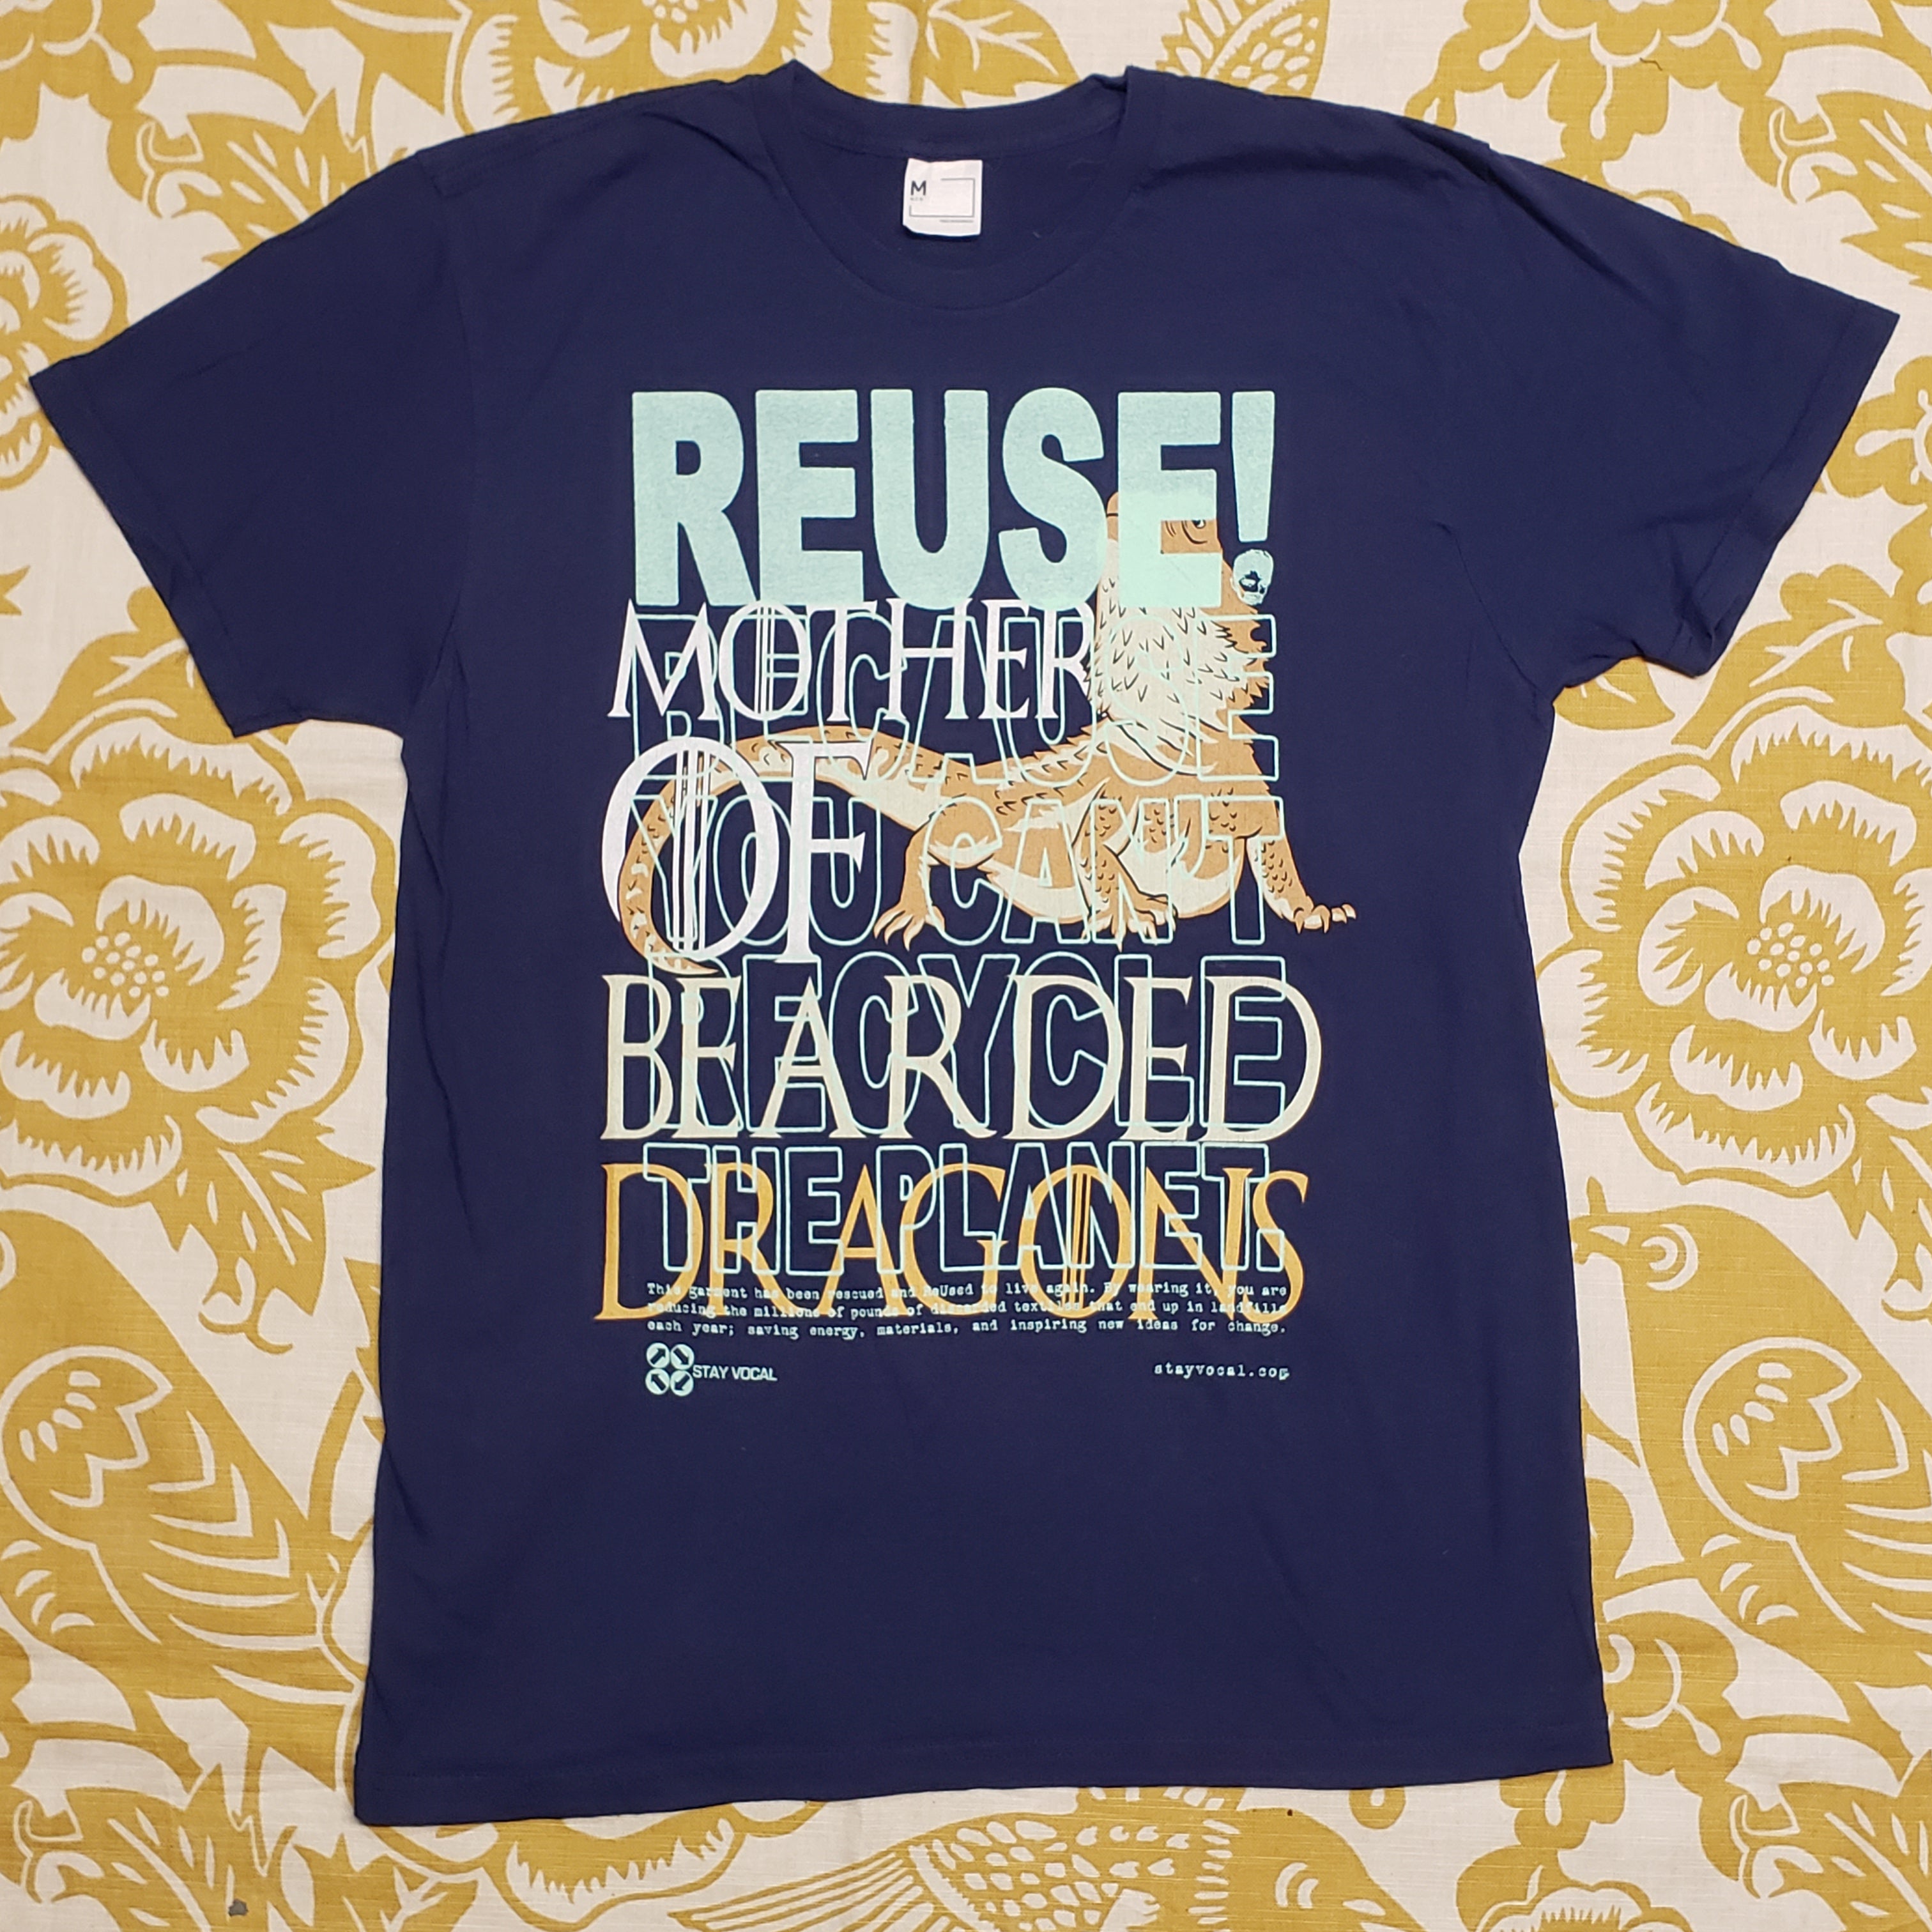 One of a Kind (Men's M) REUSE! Mother of Bearded Dragons T-Shirt